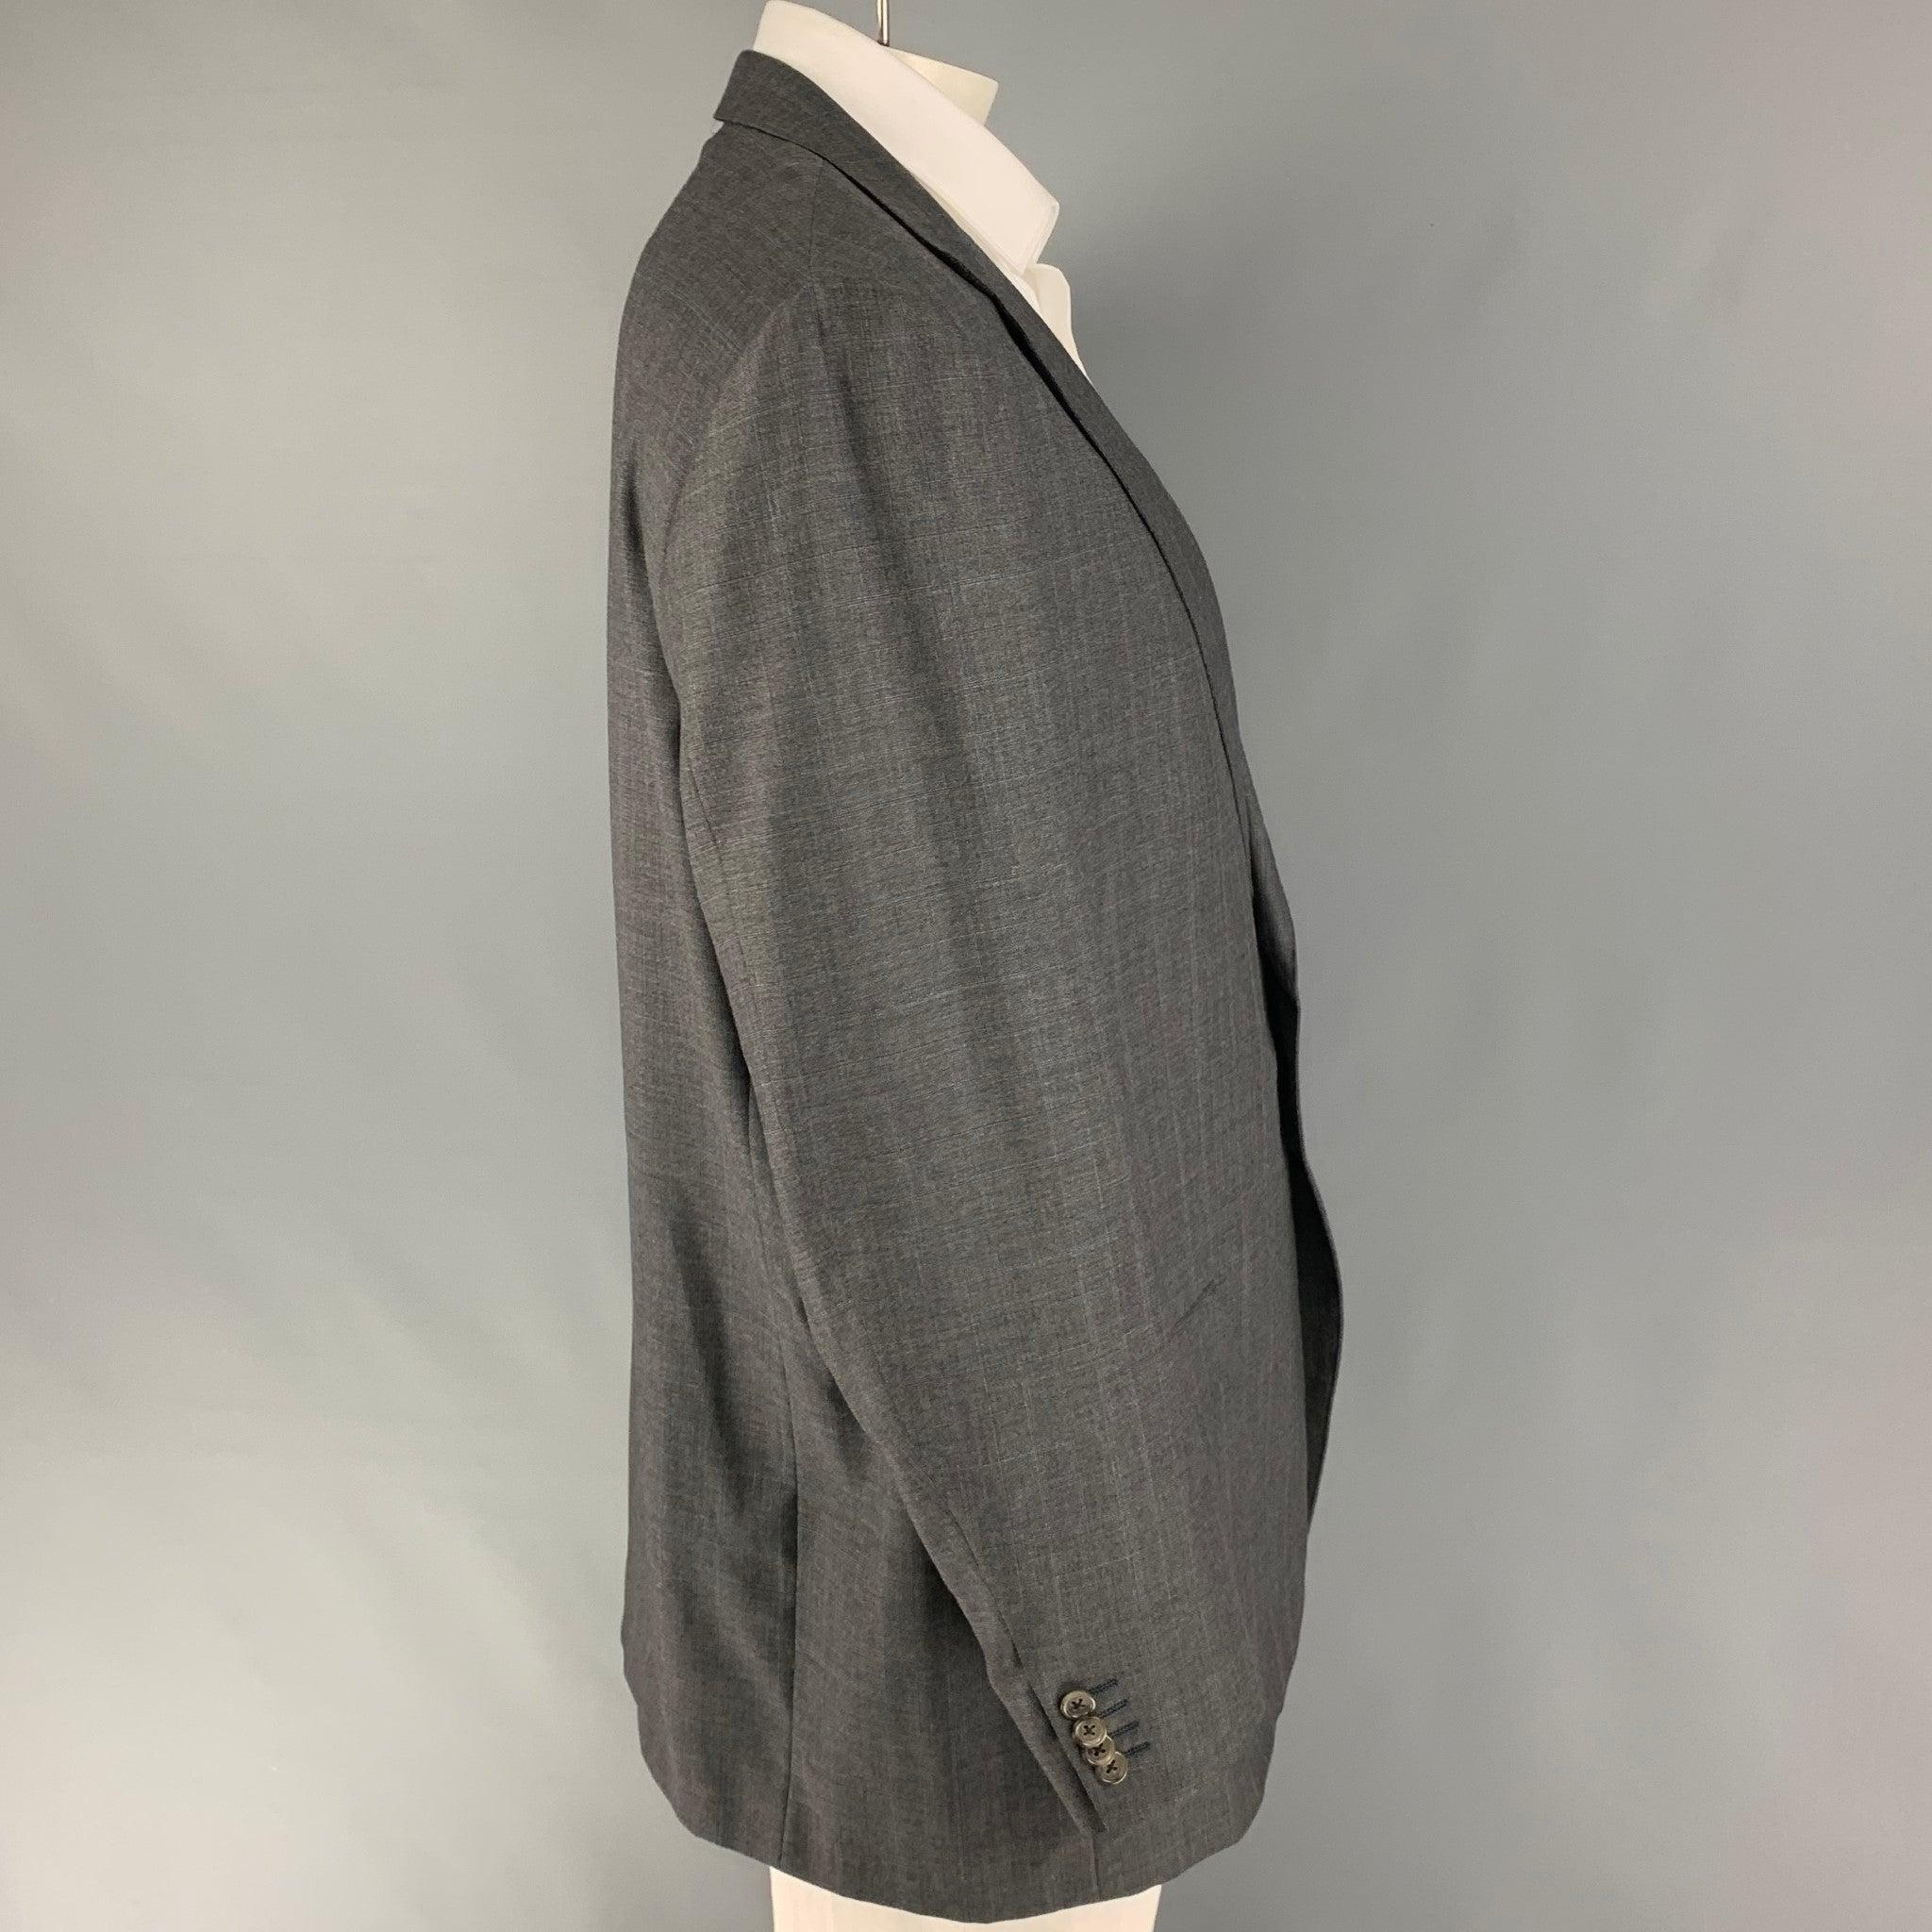 ERMENEGILDO ZEGNA
sport coat comes in a grey window pane wool with a full liner featuring a notch lapel, flap pockets, and a double button closure. Made in Italy. Very Good Pre-Owned Condition. 

Marked:   60 

Measurements: 
 
Shoulder: 20 inches 